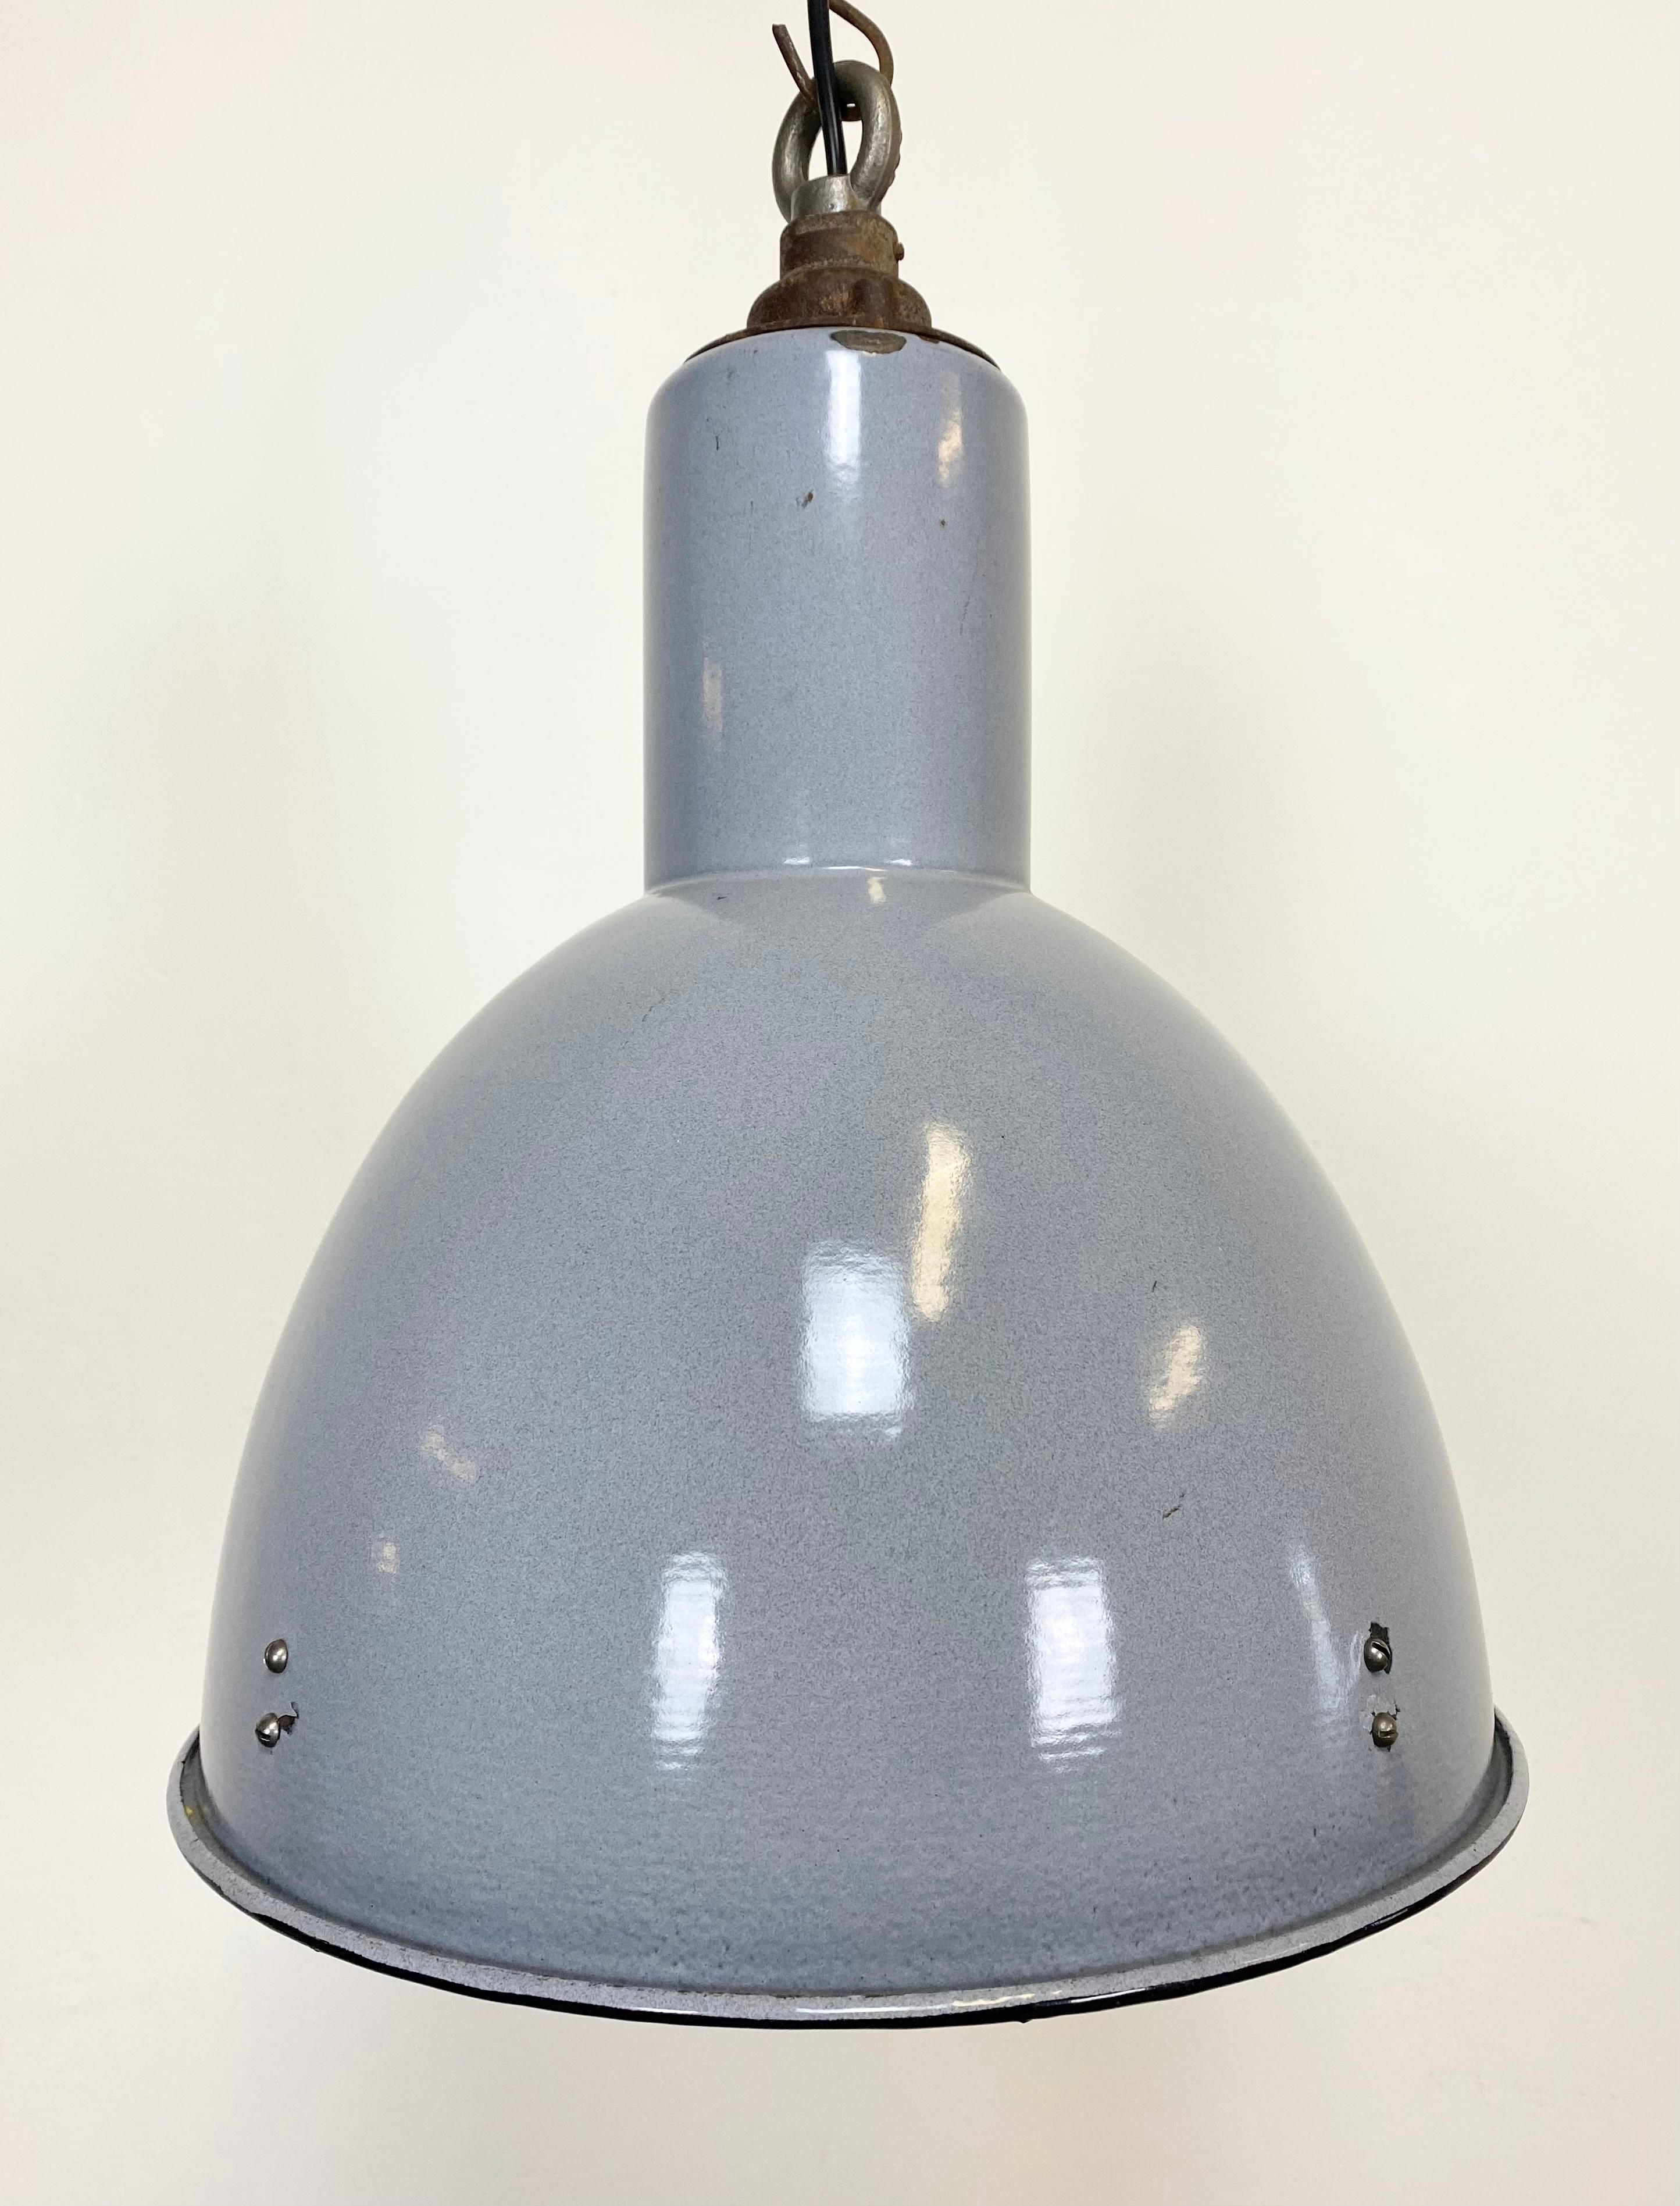 Vintage Industrial Bauhaus style lamp with grey enamel featuring and white interior. Iron top, 1940s. New porcelain socket for E27 lightbulbs and wire. Weight of the lamp is 3 kg.